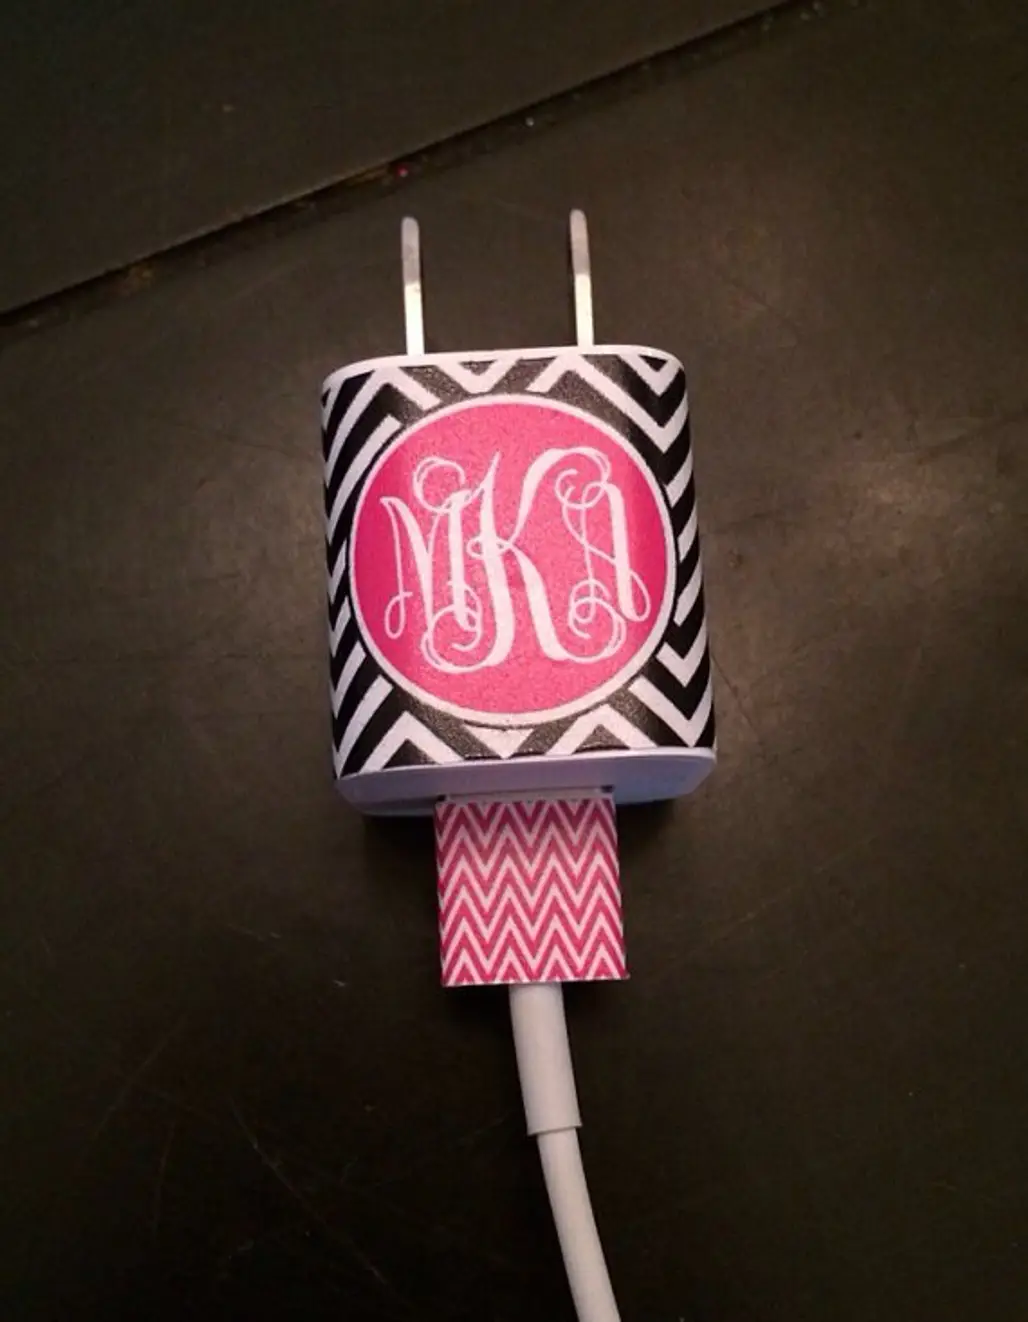 Iphone or Ipod Vine Monogram Charger and USB Wrap in Tight Chevron - Customizable